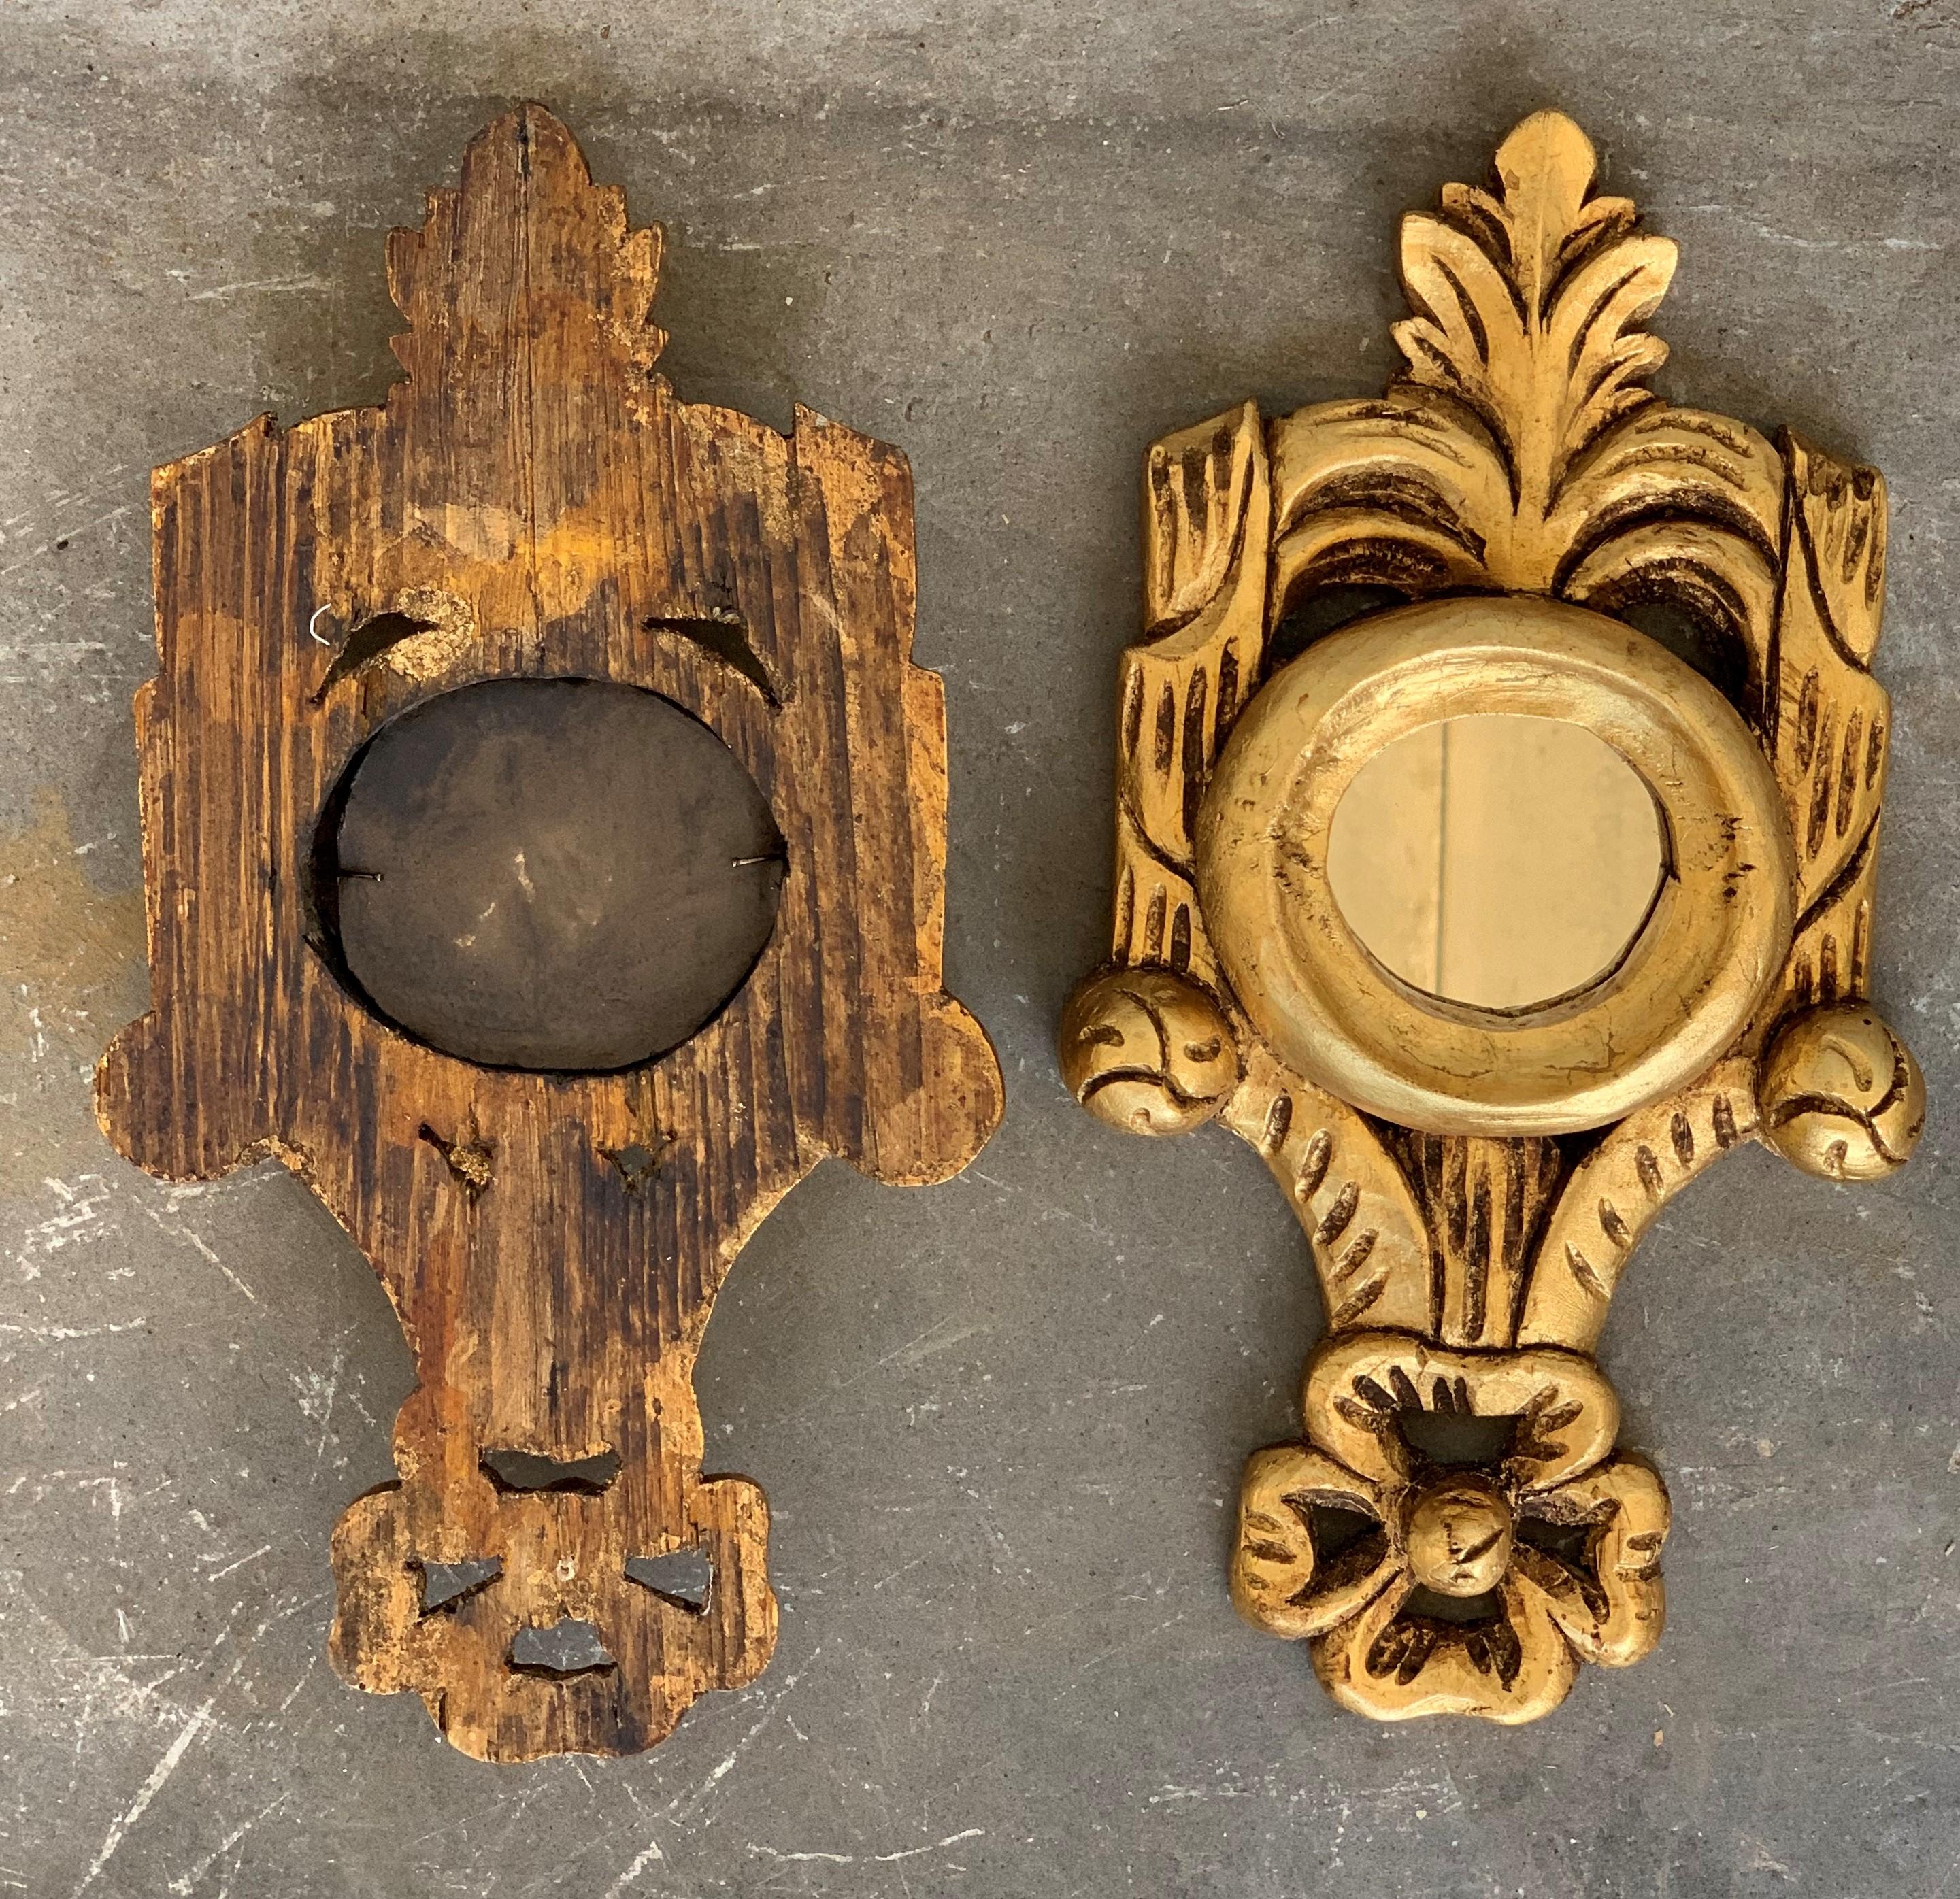 Exquisite Rococo style miniature carved mirrors with a crest on the top and carved naturalistic details at the frames. These pieces are unusual due to their size, they wear their original glasses and they are made of carved wood, gesso and 24-karat